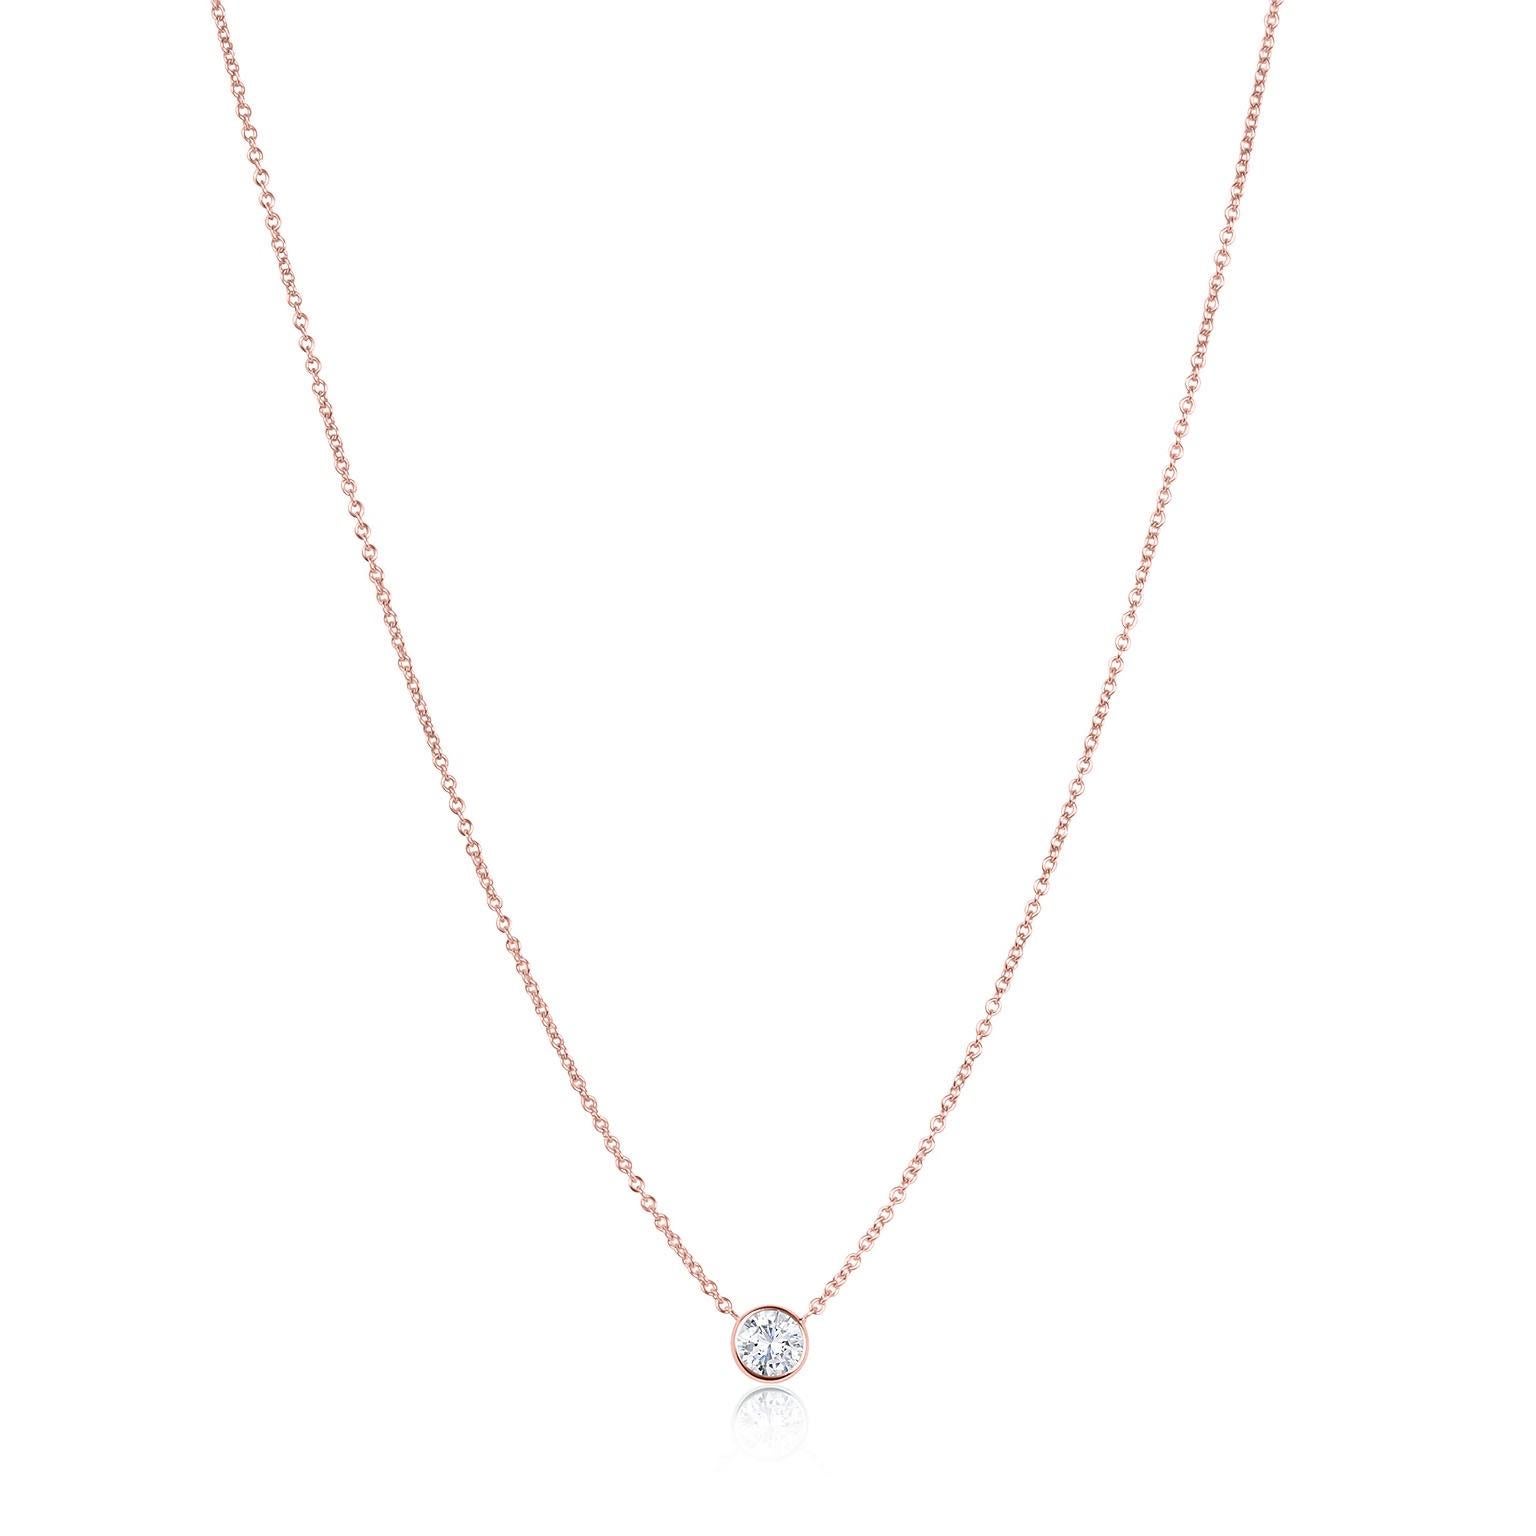 This stunning pendant necklace set in Italian hand made rose gold  setting  featuring a charming round  brilliant cut diamond, weighing 0.44 carats. F color SI2 clarity.
The incredible craftsmanship not often found on pendants this size has the